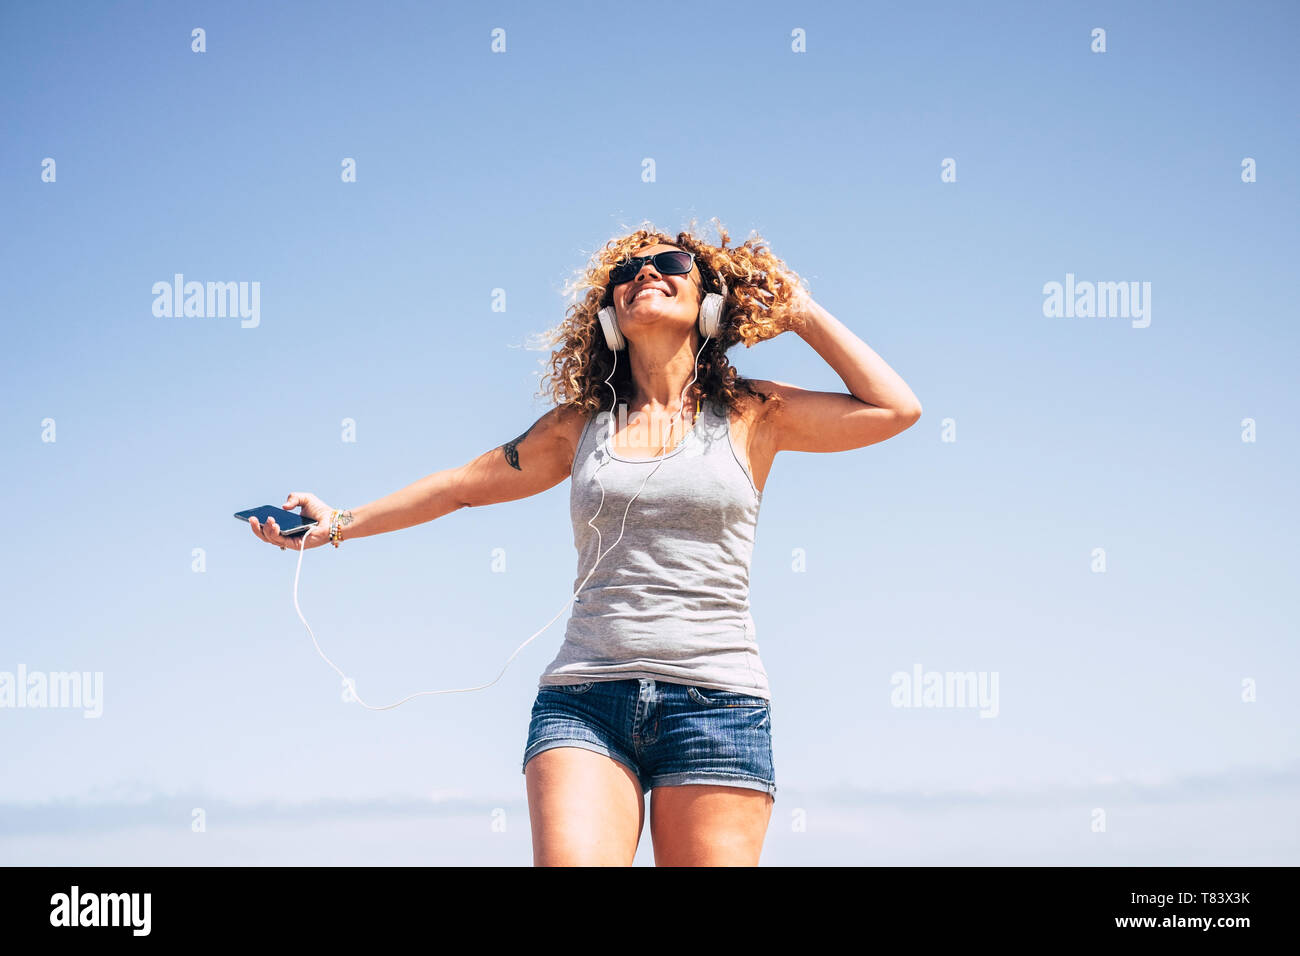 Happy woman enjoying life. One people middle aged with curly hair outdoor on the beach. Freedom concept and joy Stock Photo